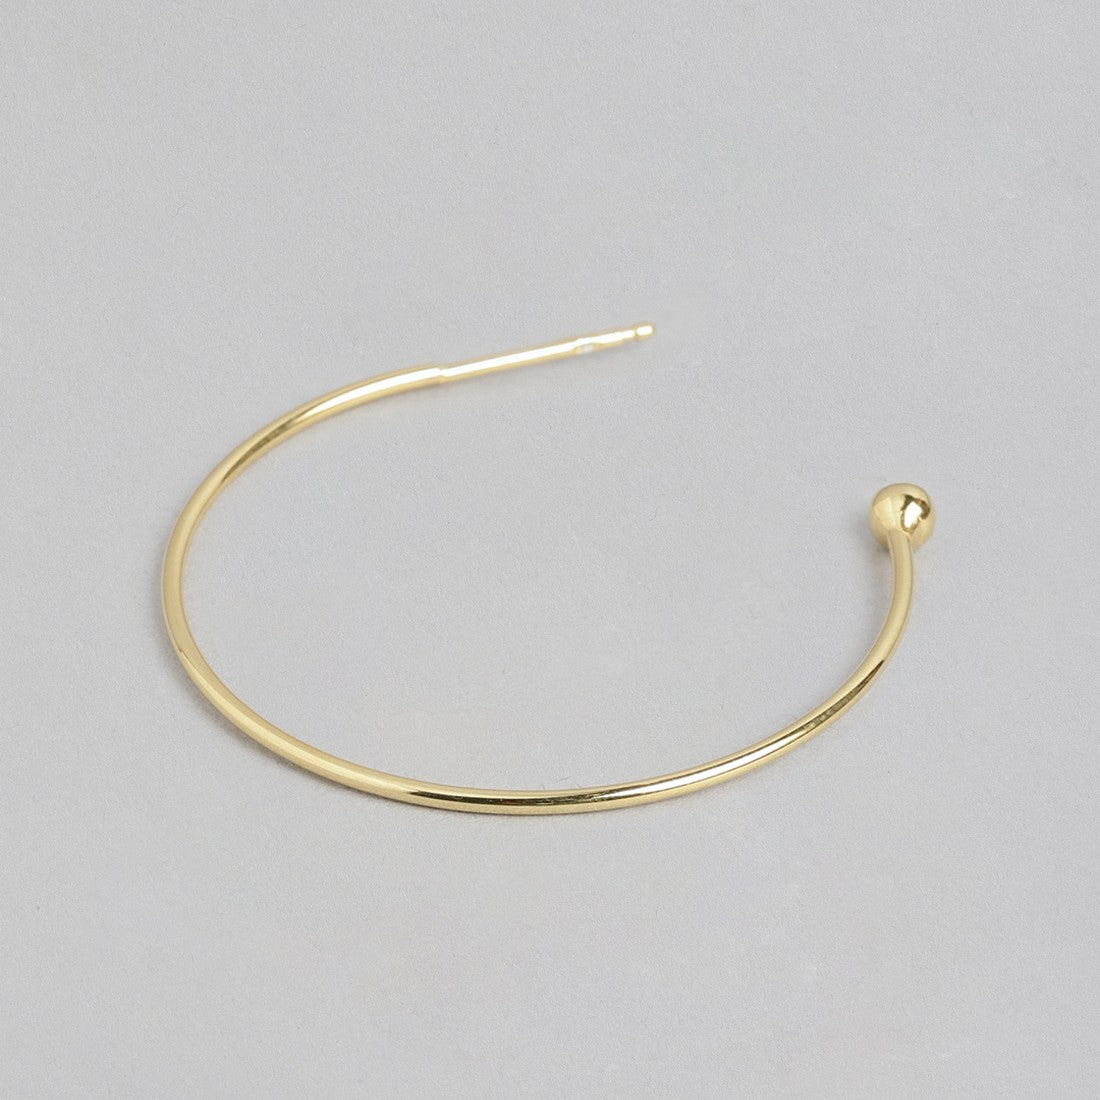 Single Drop Gold Plated 925 Sterling Silver Earring